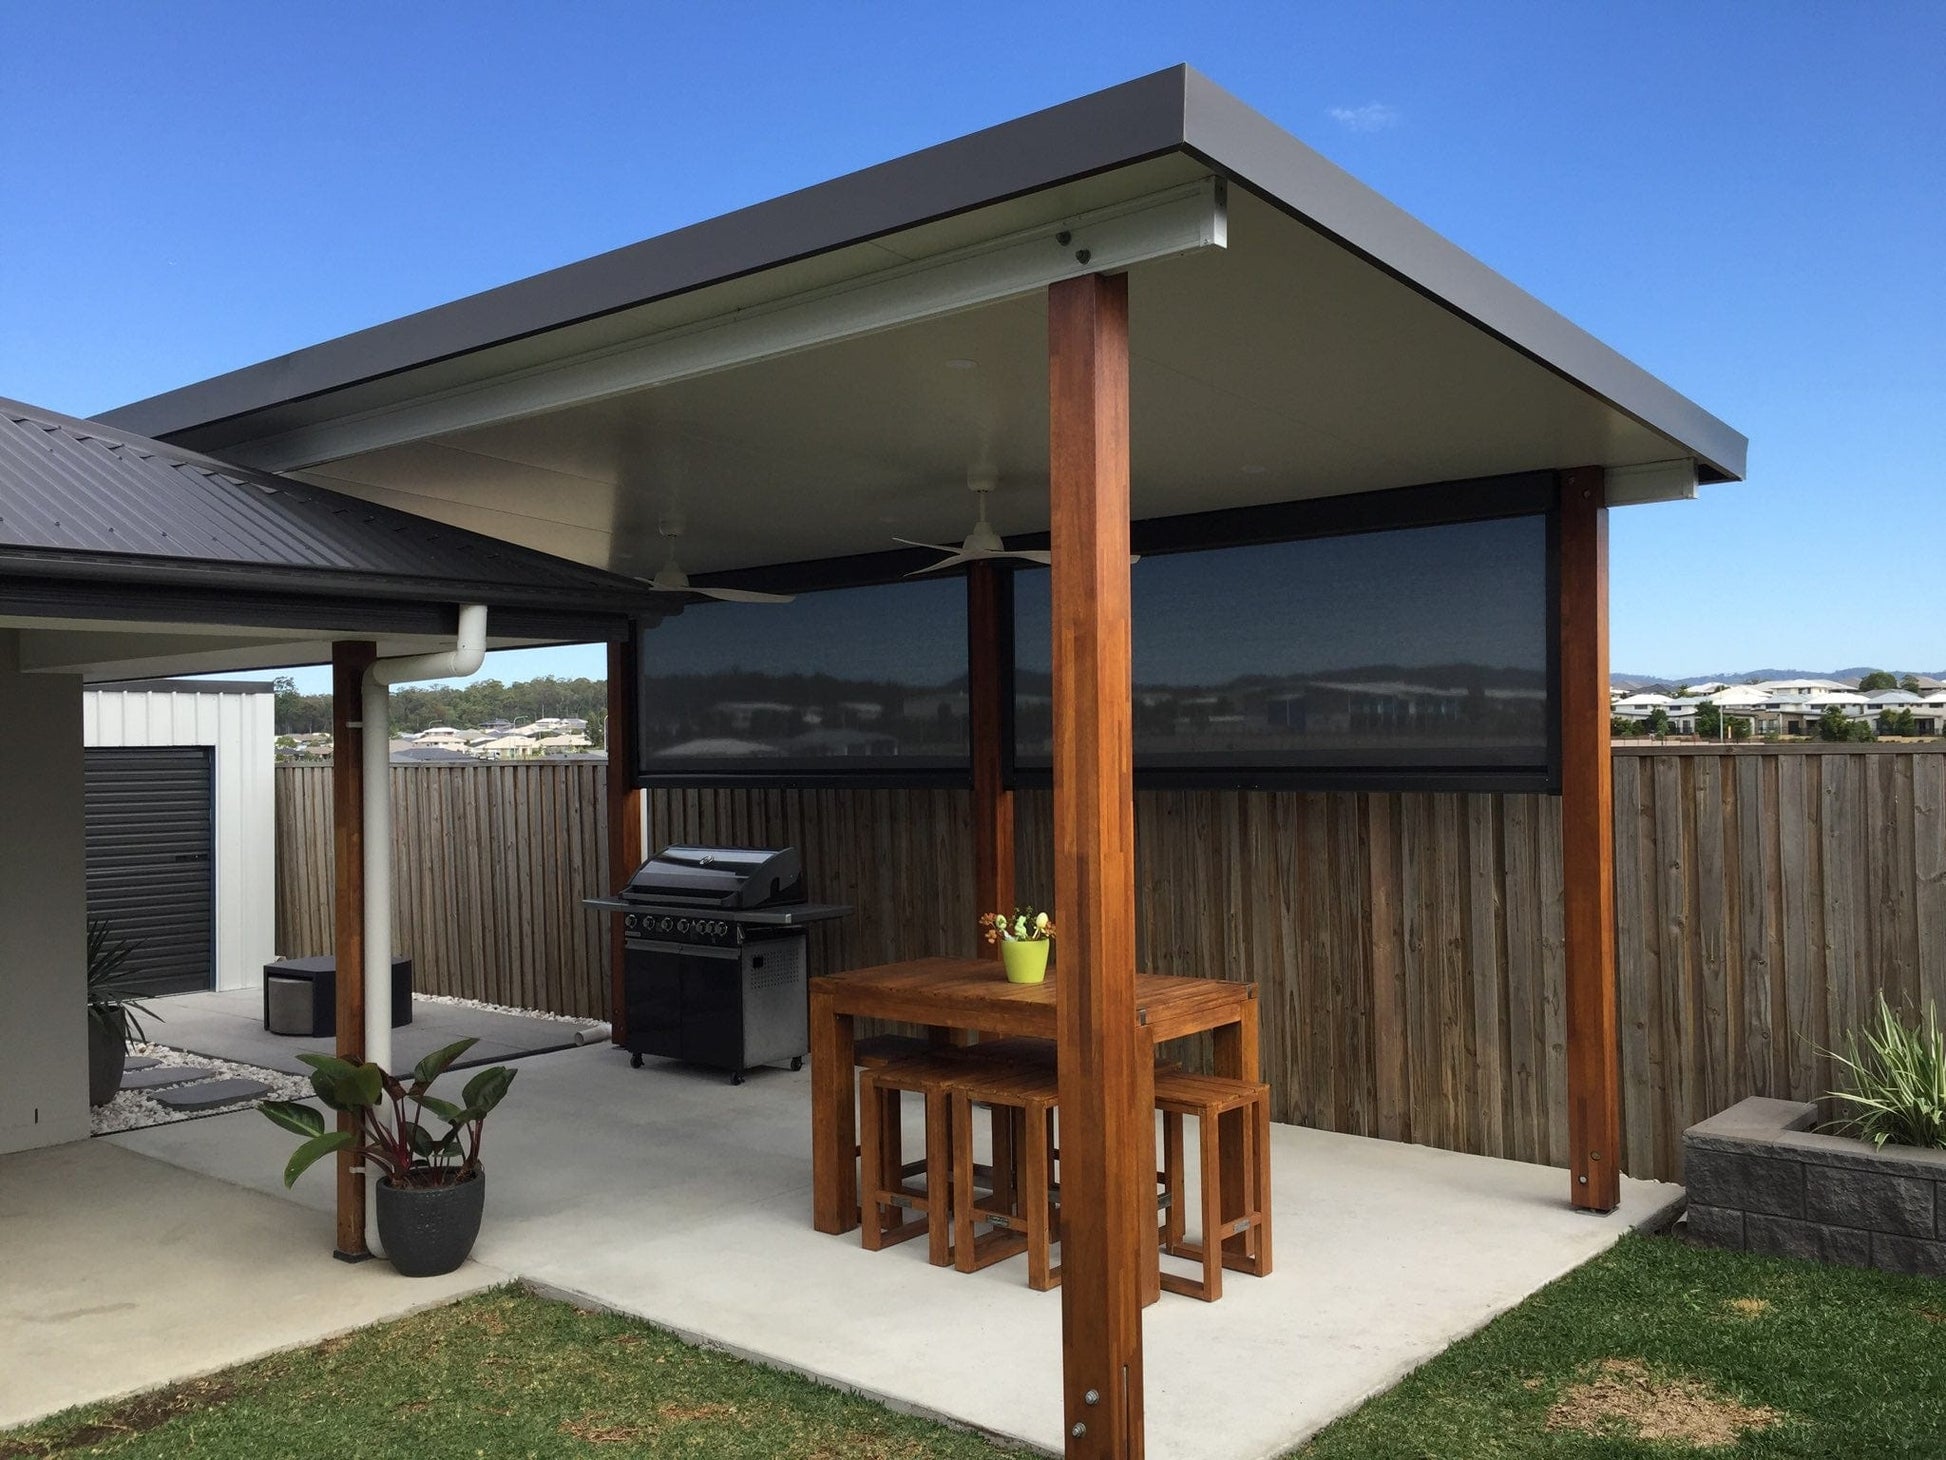 Insulated Flyover Patio Roof- 11m x 8m- Supply & Install QHI National